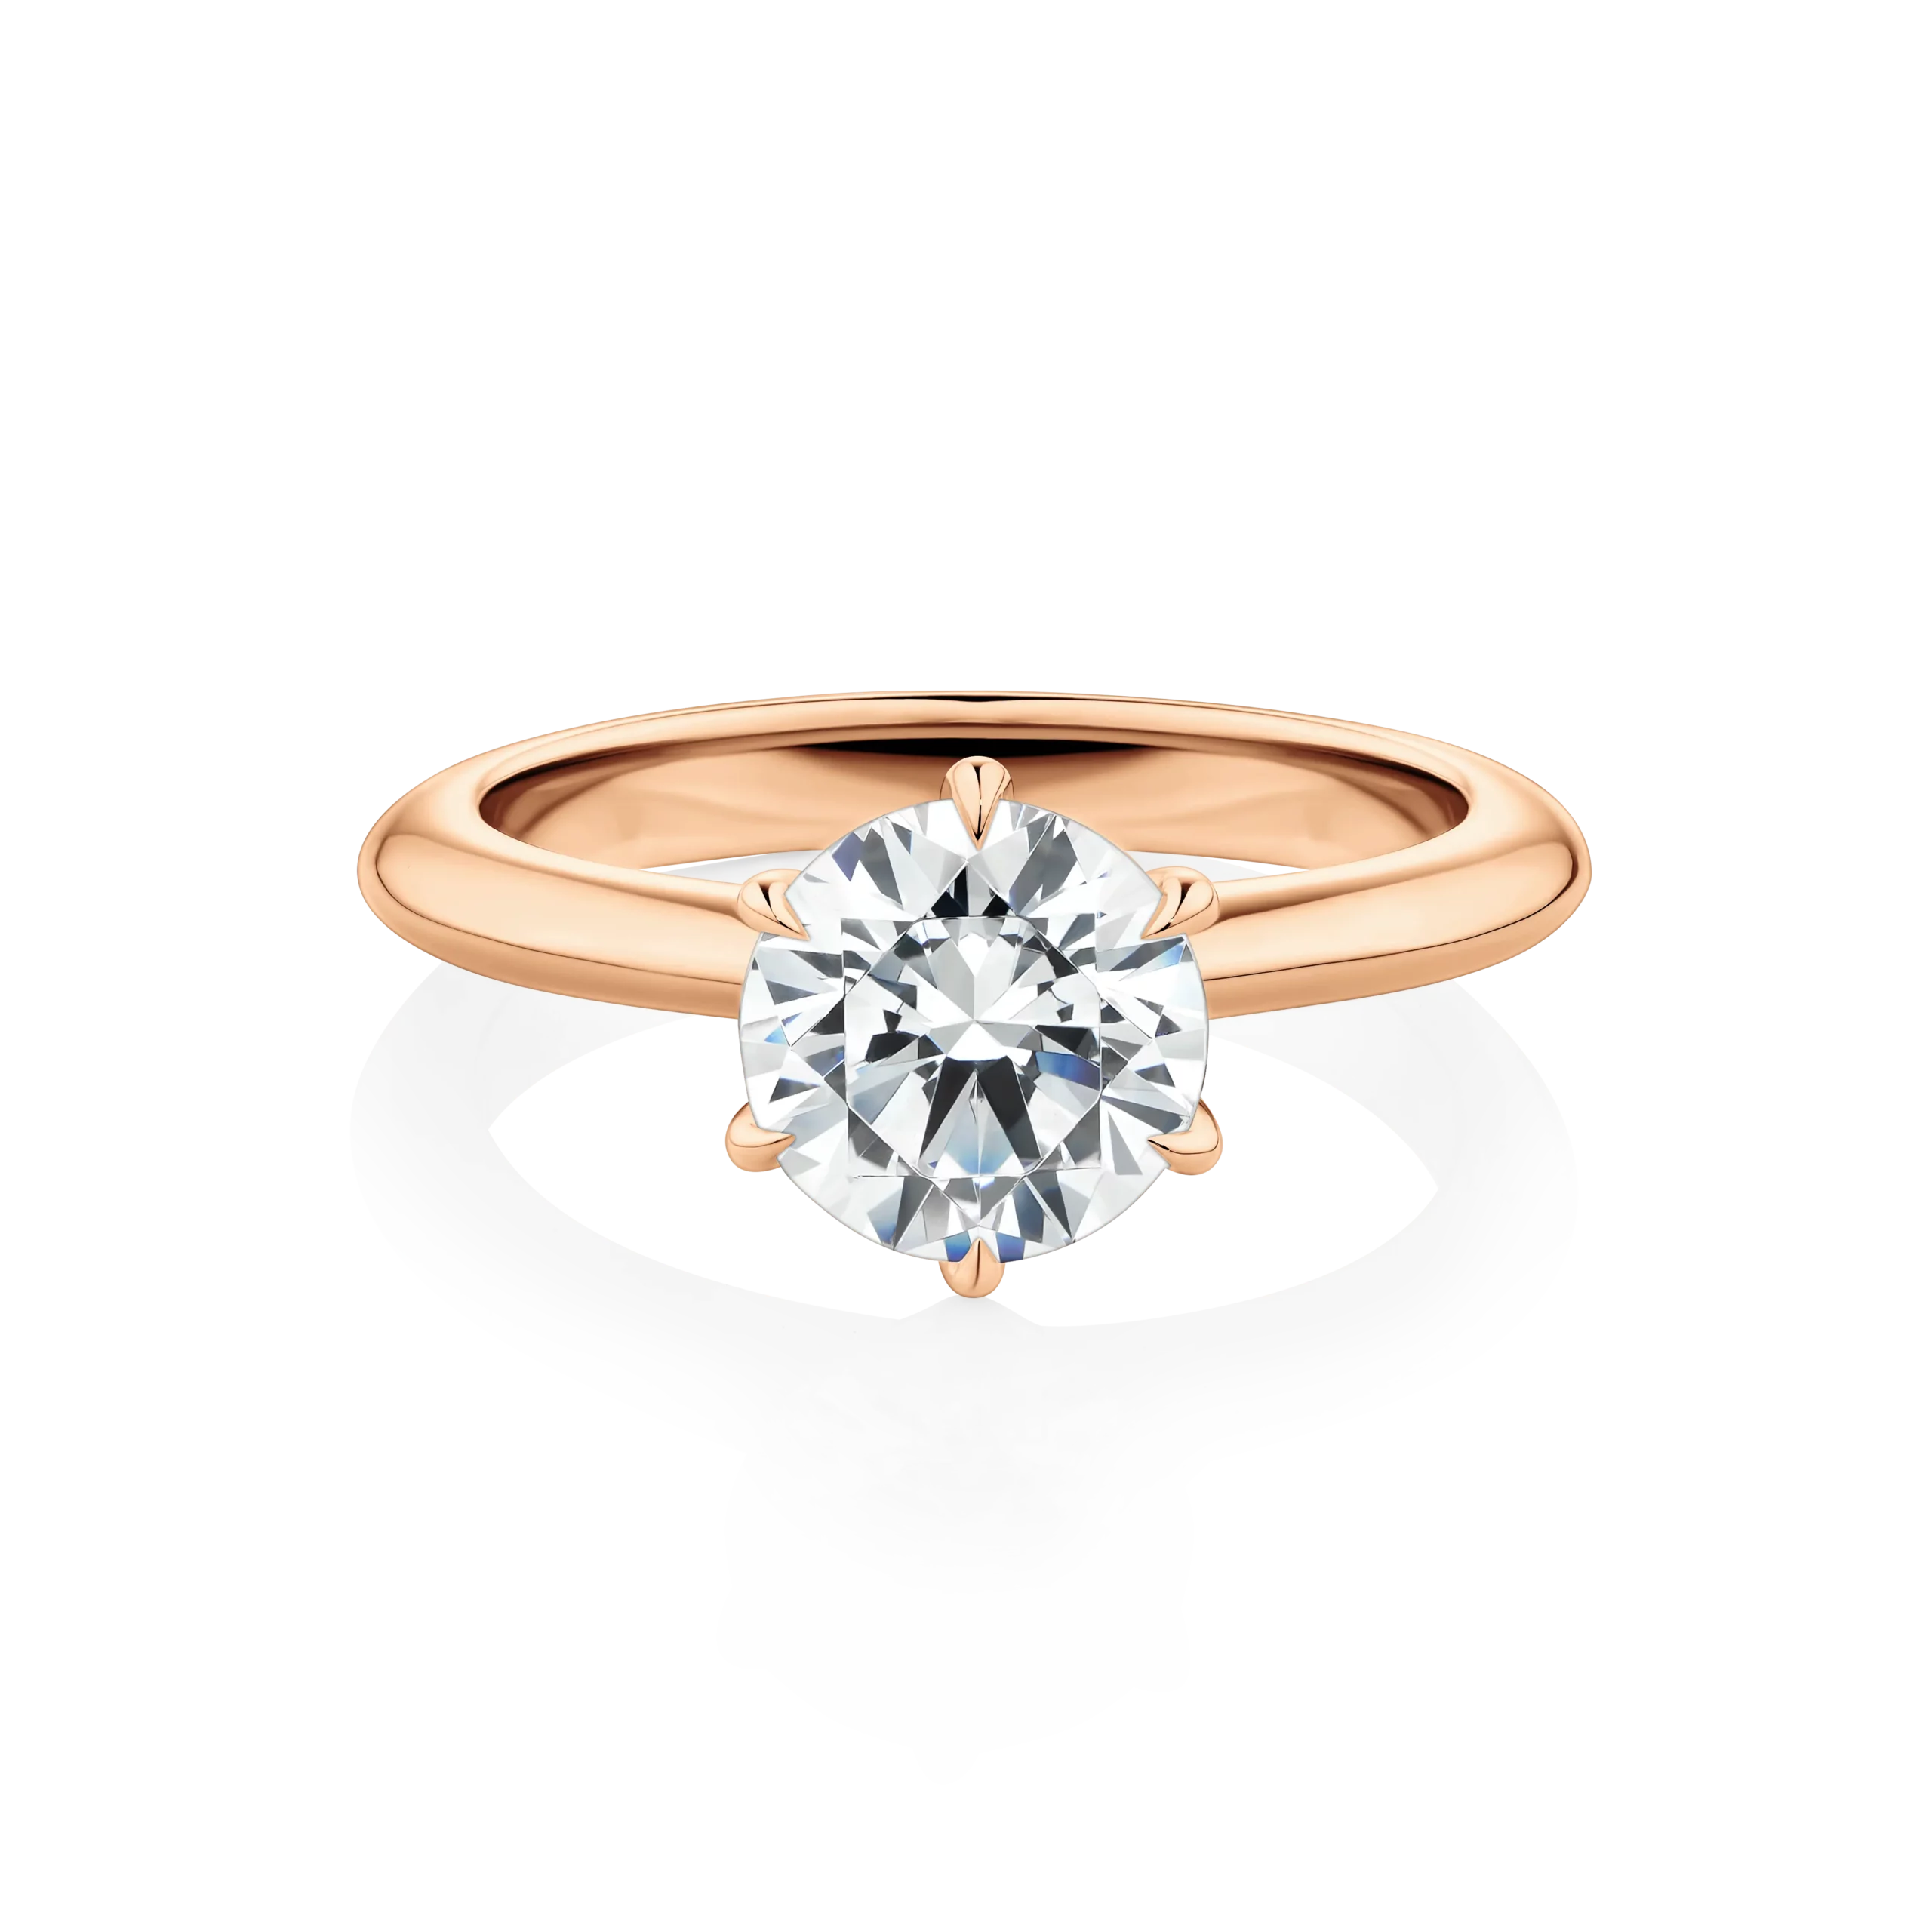 Southern-Star-Rose-Gold-6-claw-Round-Cut-Diamond-Engagement-Ring